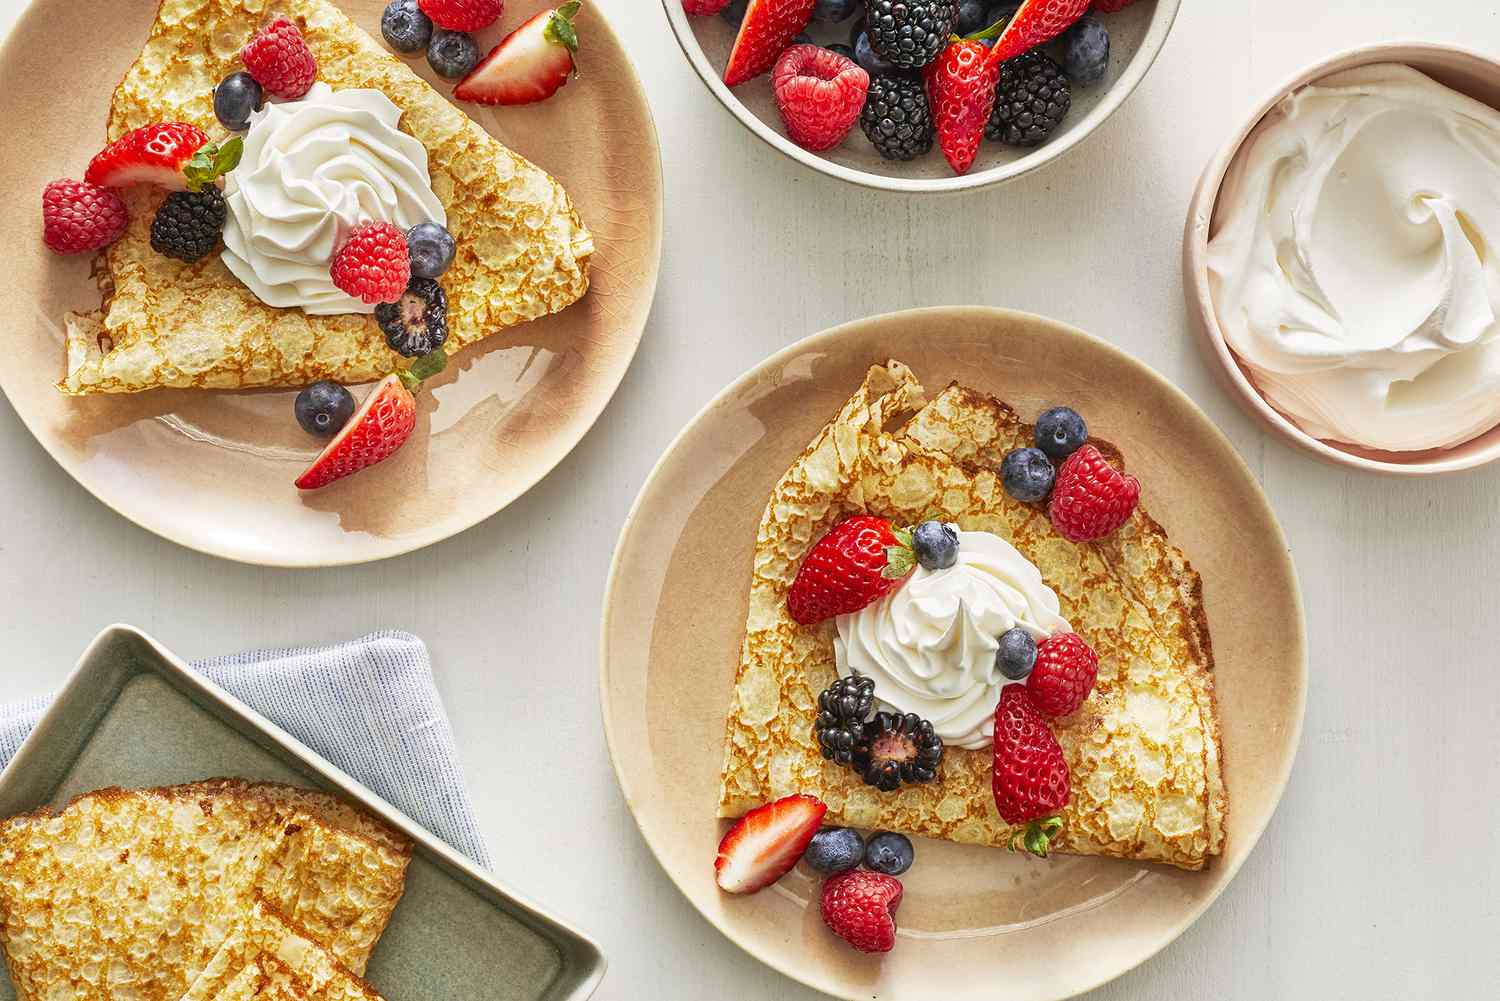 Say yes to breakfast and dinner crepes!